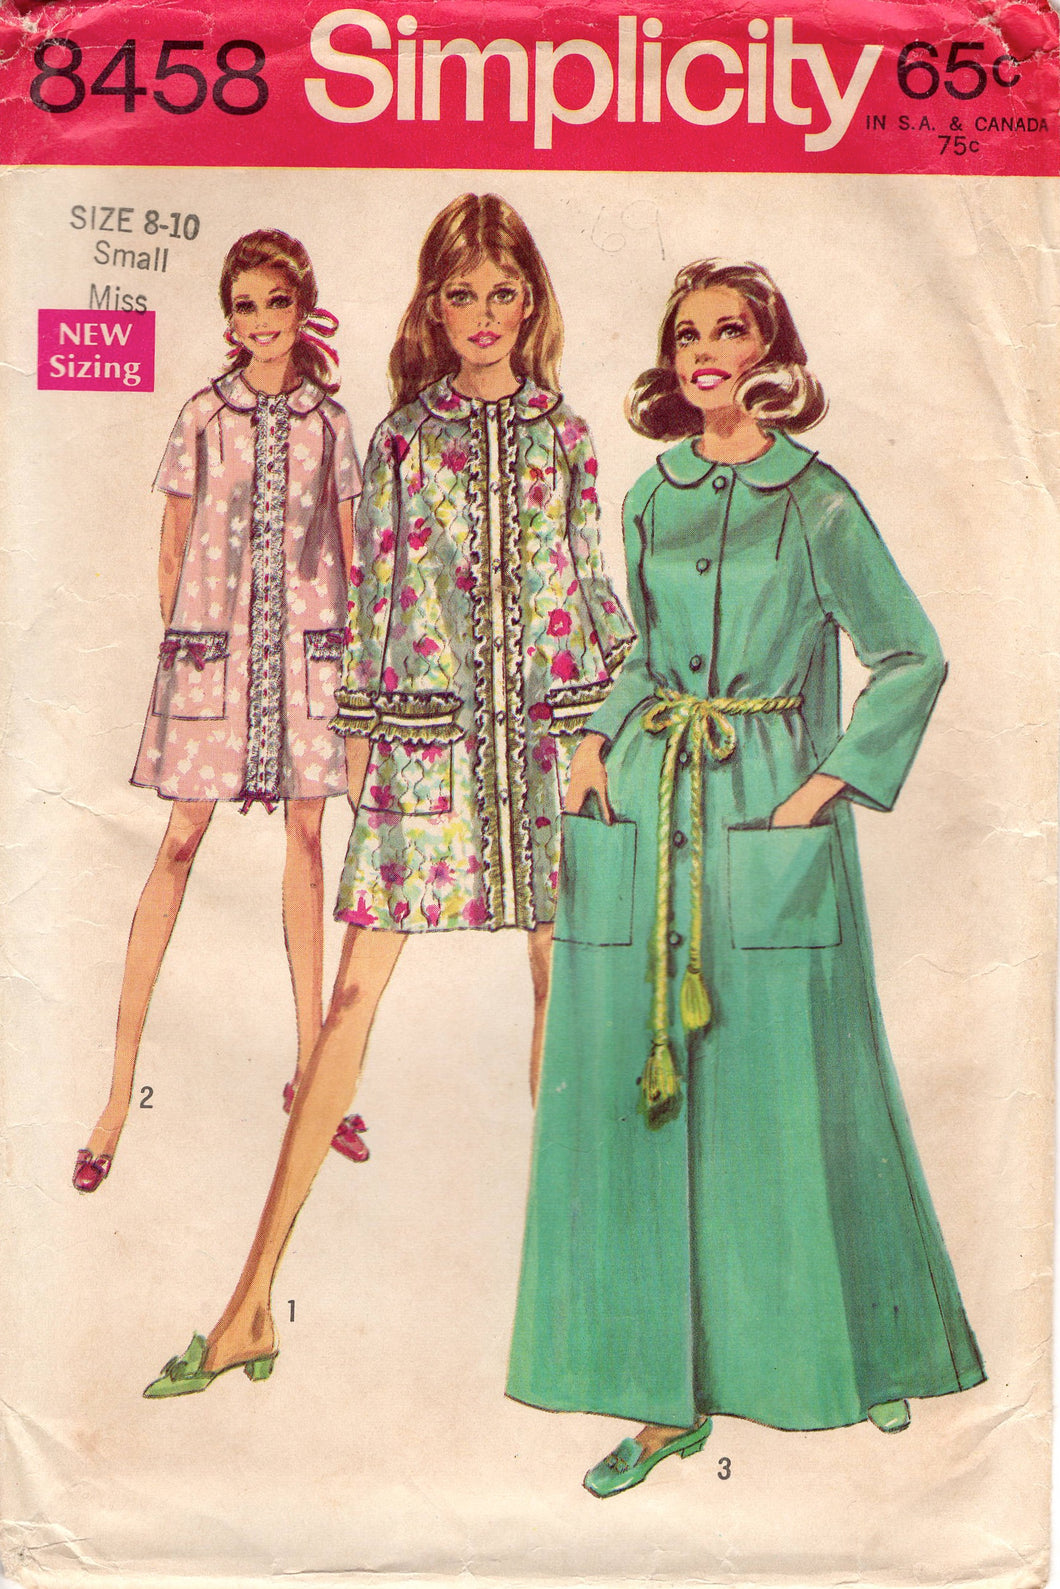 1960's Simplicity Robe pattern in Two Lengths - Bust 31.5-32.5